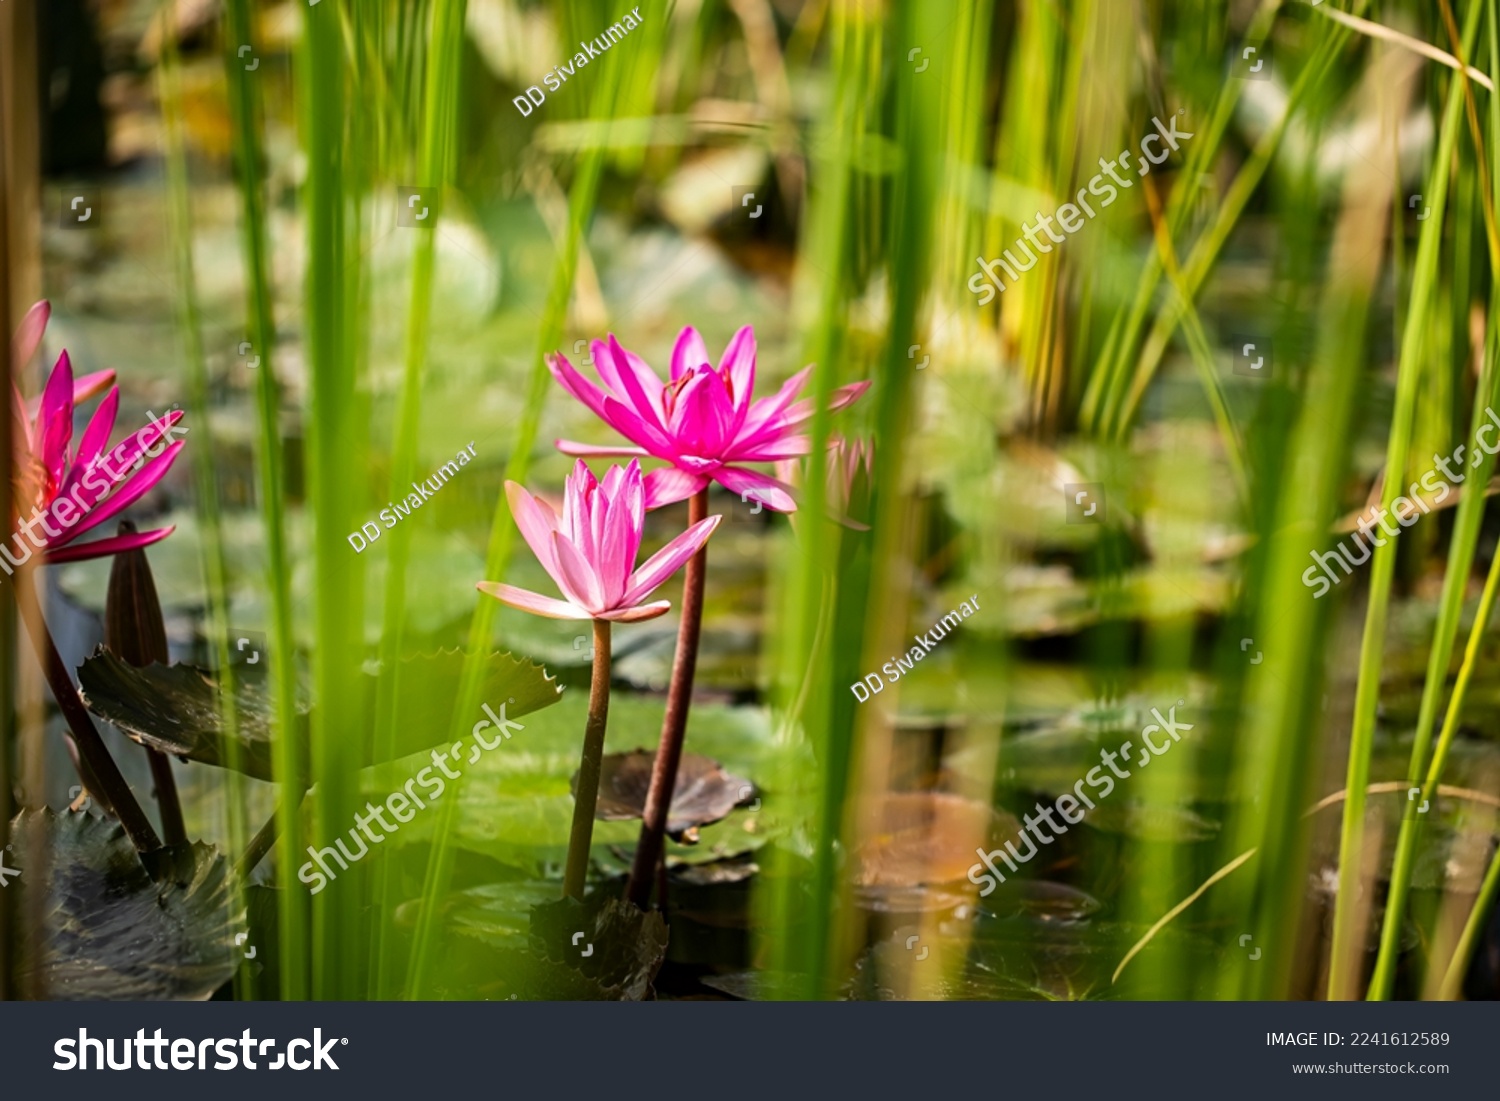 Nelumbo nucifera, also known as sacred lotus, Laxmi lotus, Indian lotus,[1] or simply lotus, is one of two extant species of aquatic plant in the family Nelumbonaceae. It is also called water lily #2241612589